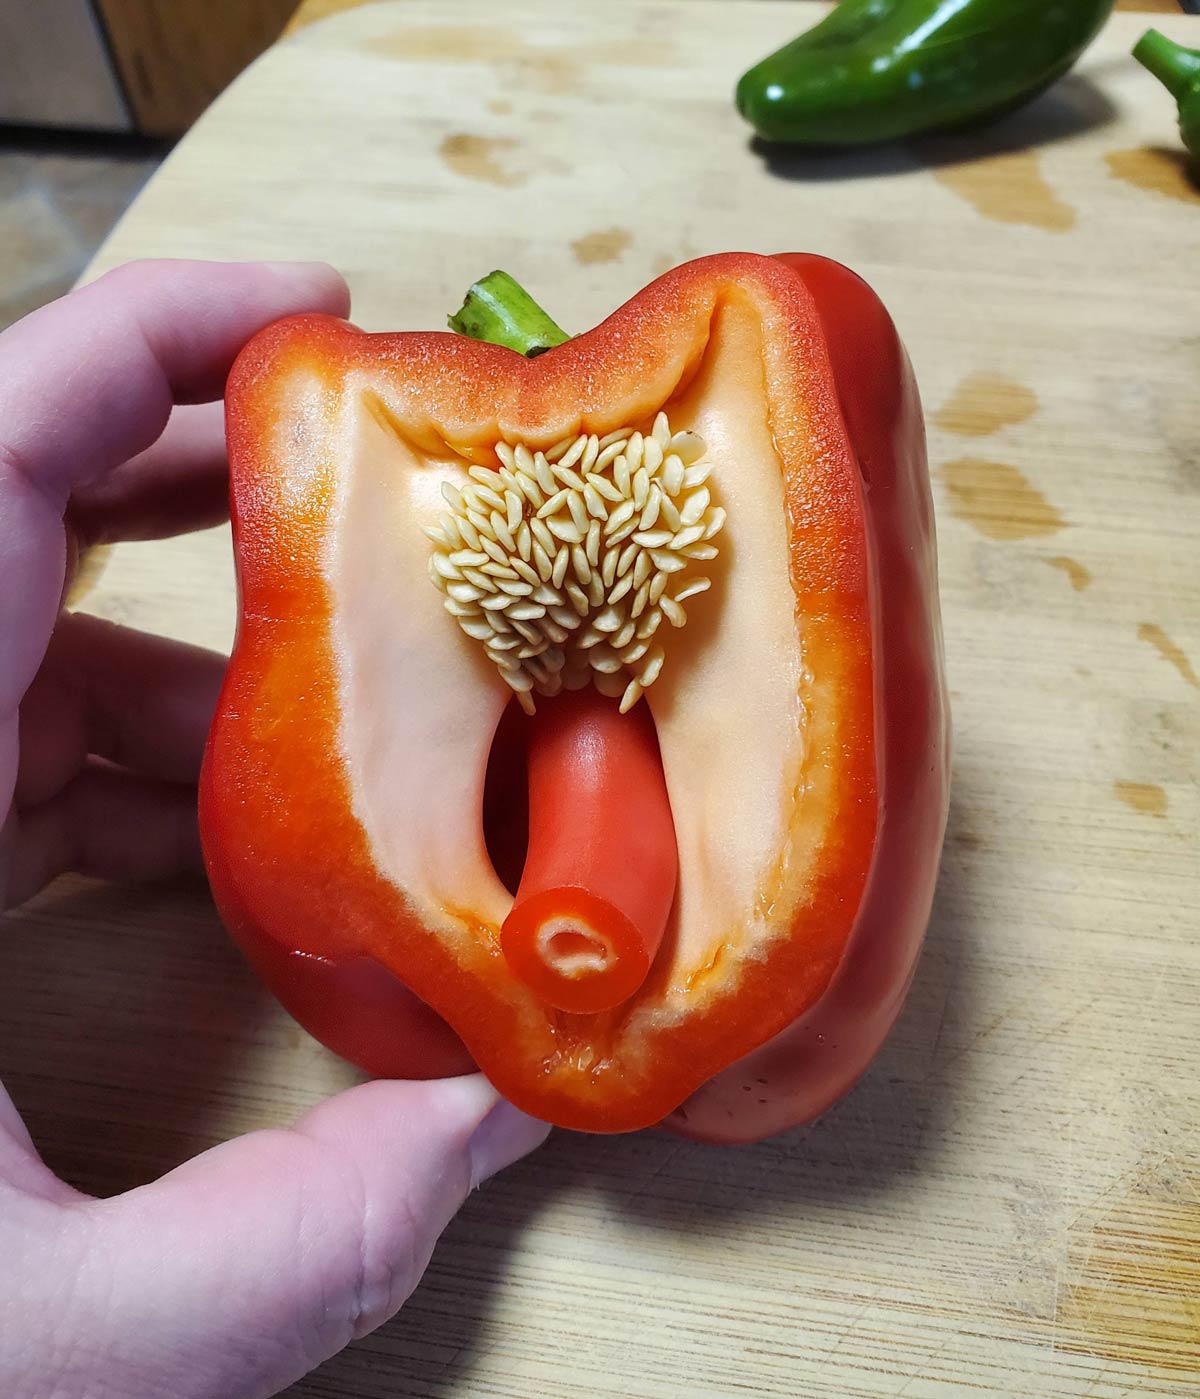 This bell pepper I just cut open makes me...uncomfortable